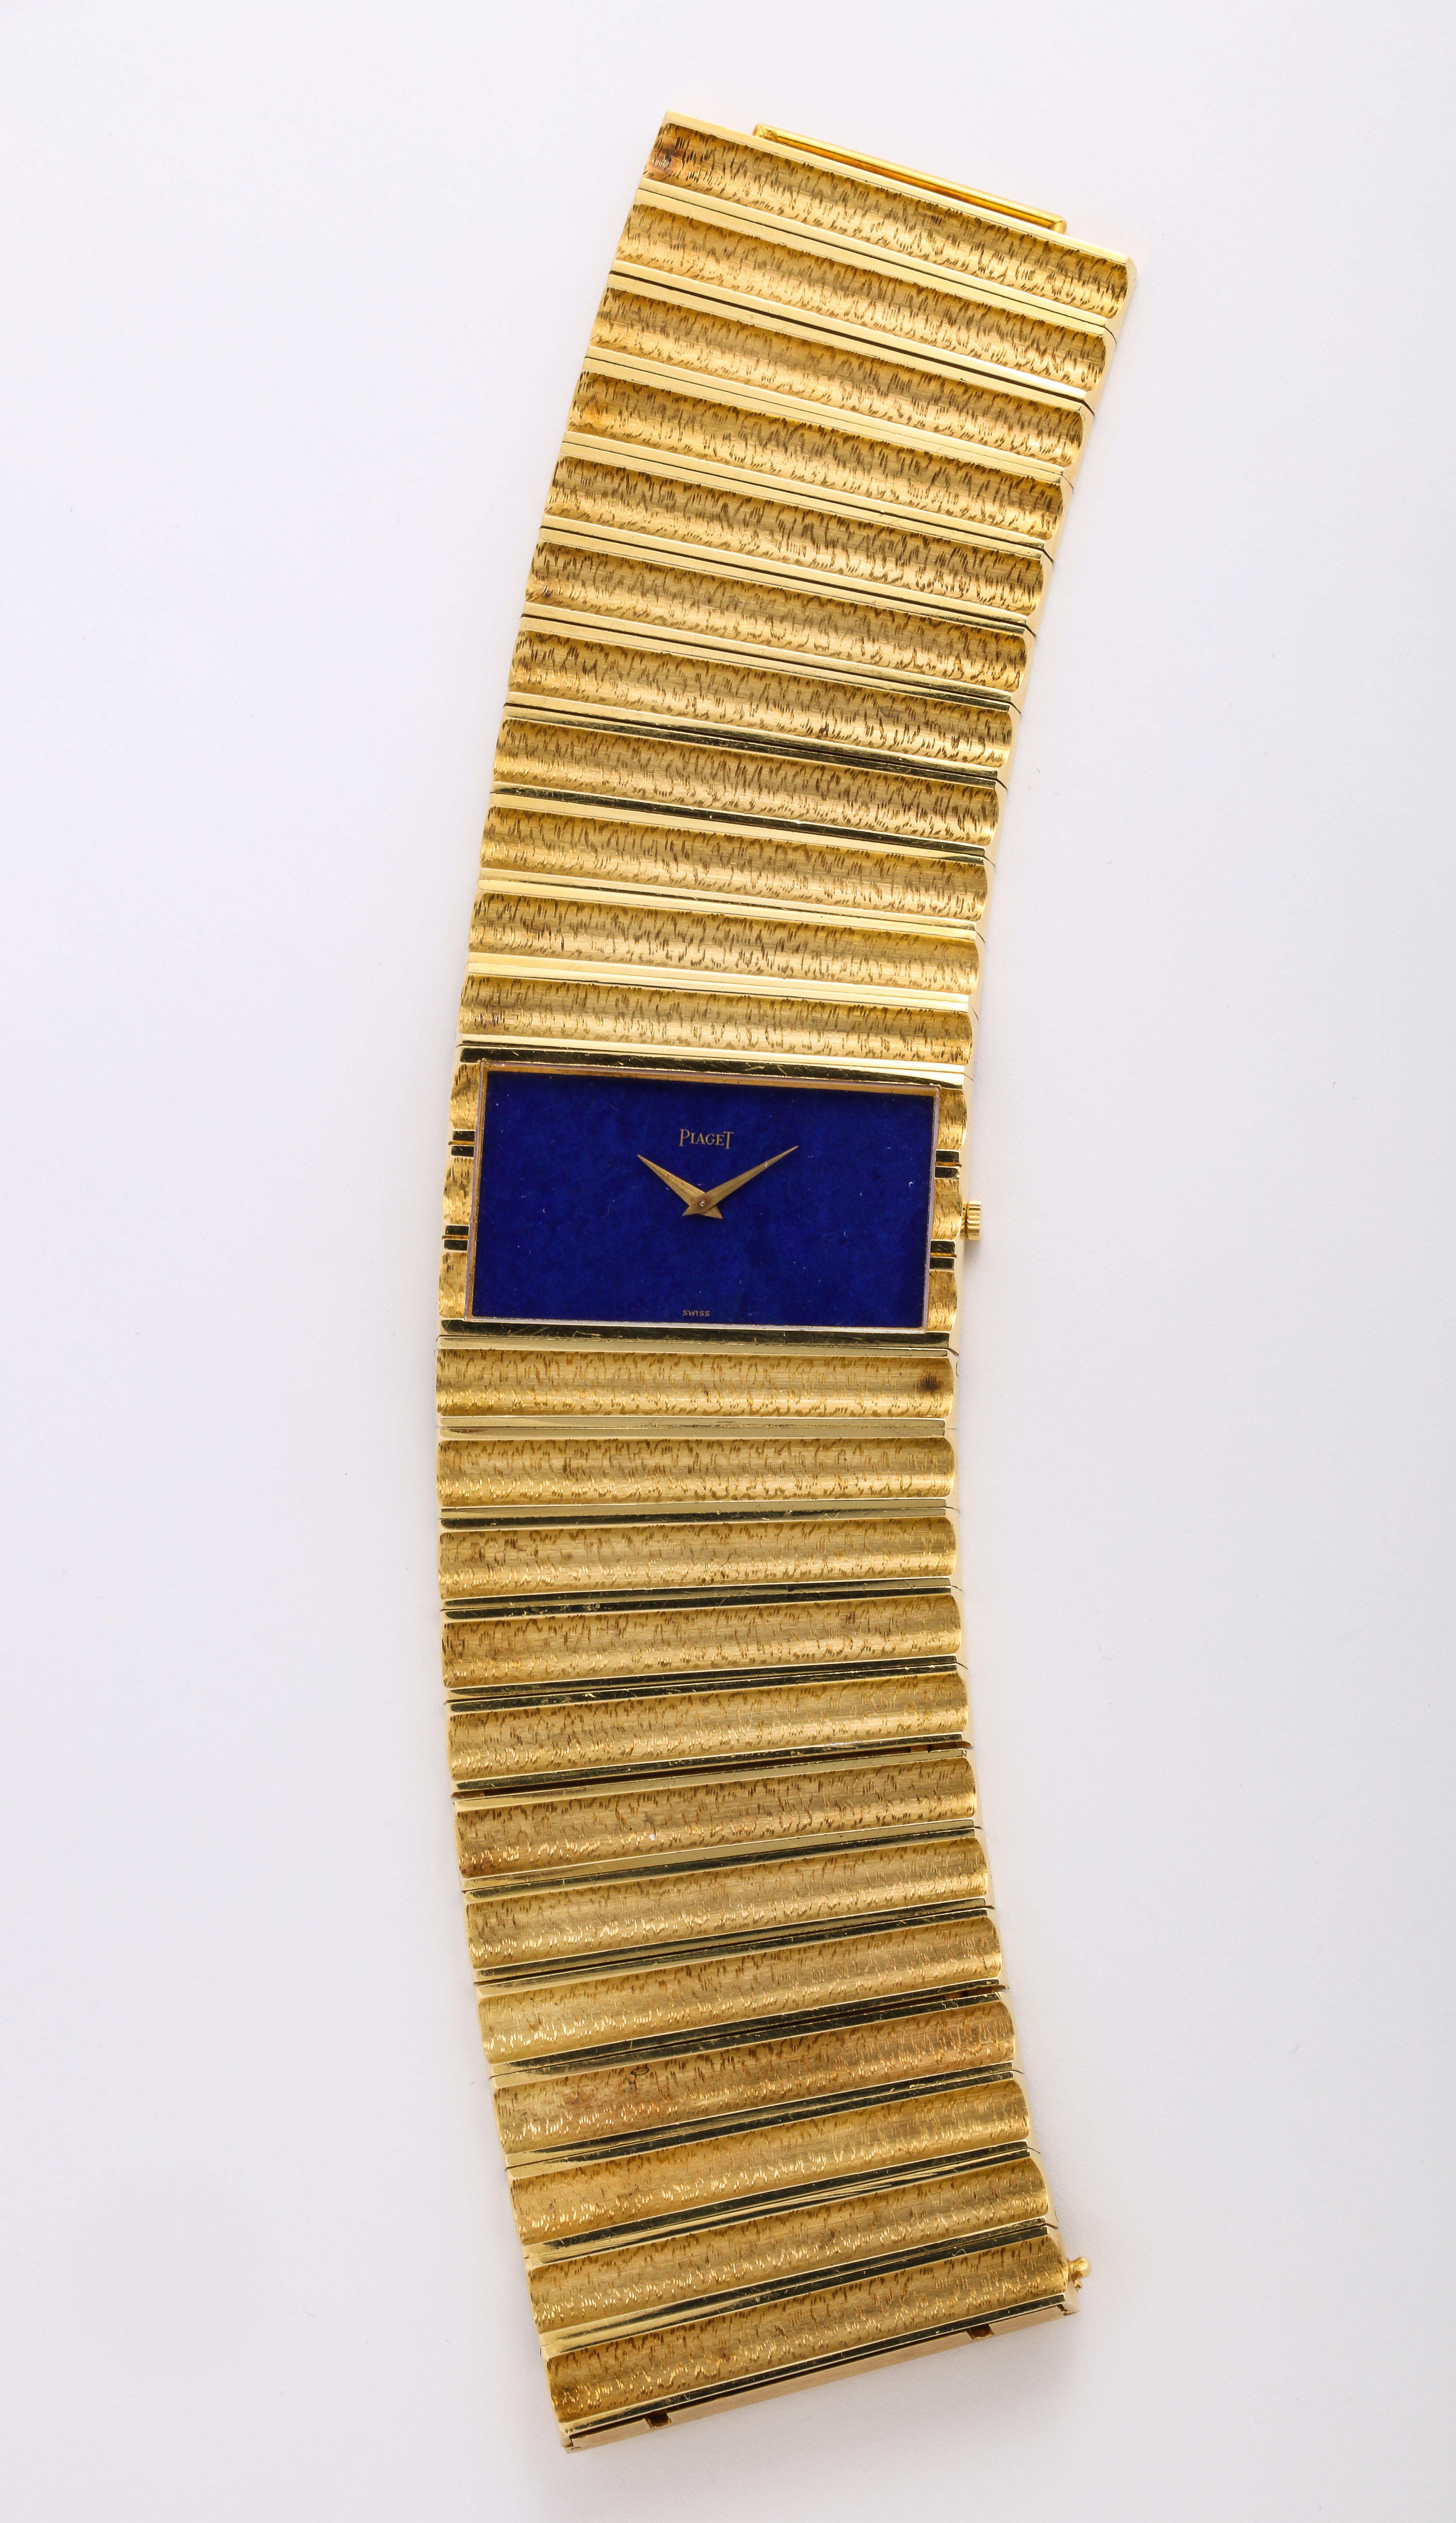 A bold watch by Piaget, created in 18k yellow gold with a rectangular lapis dial, measuring 7 ½ long x 1 ¾ wide. 125.6 dwt. The clasp is marked Piaget 750. 

Material: 
18k Yellow Gold

Stone:
Lapis

Markings:
Marked 9000 D78 / 173499 ©